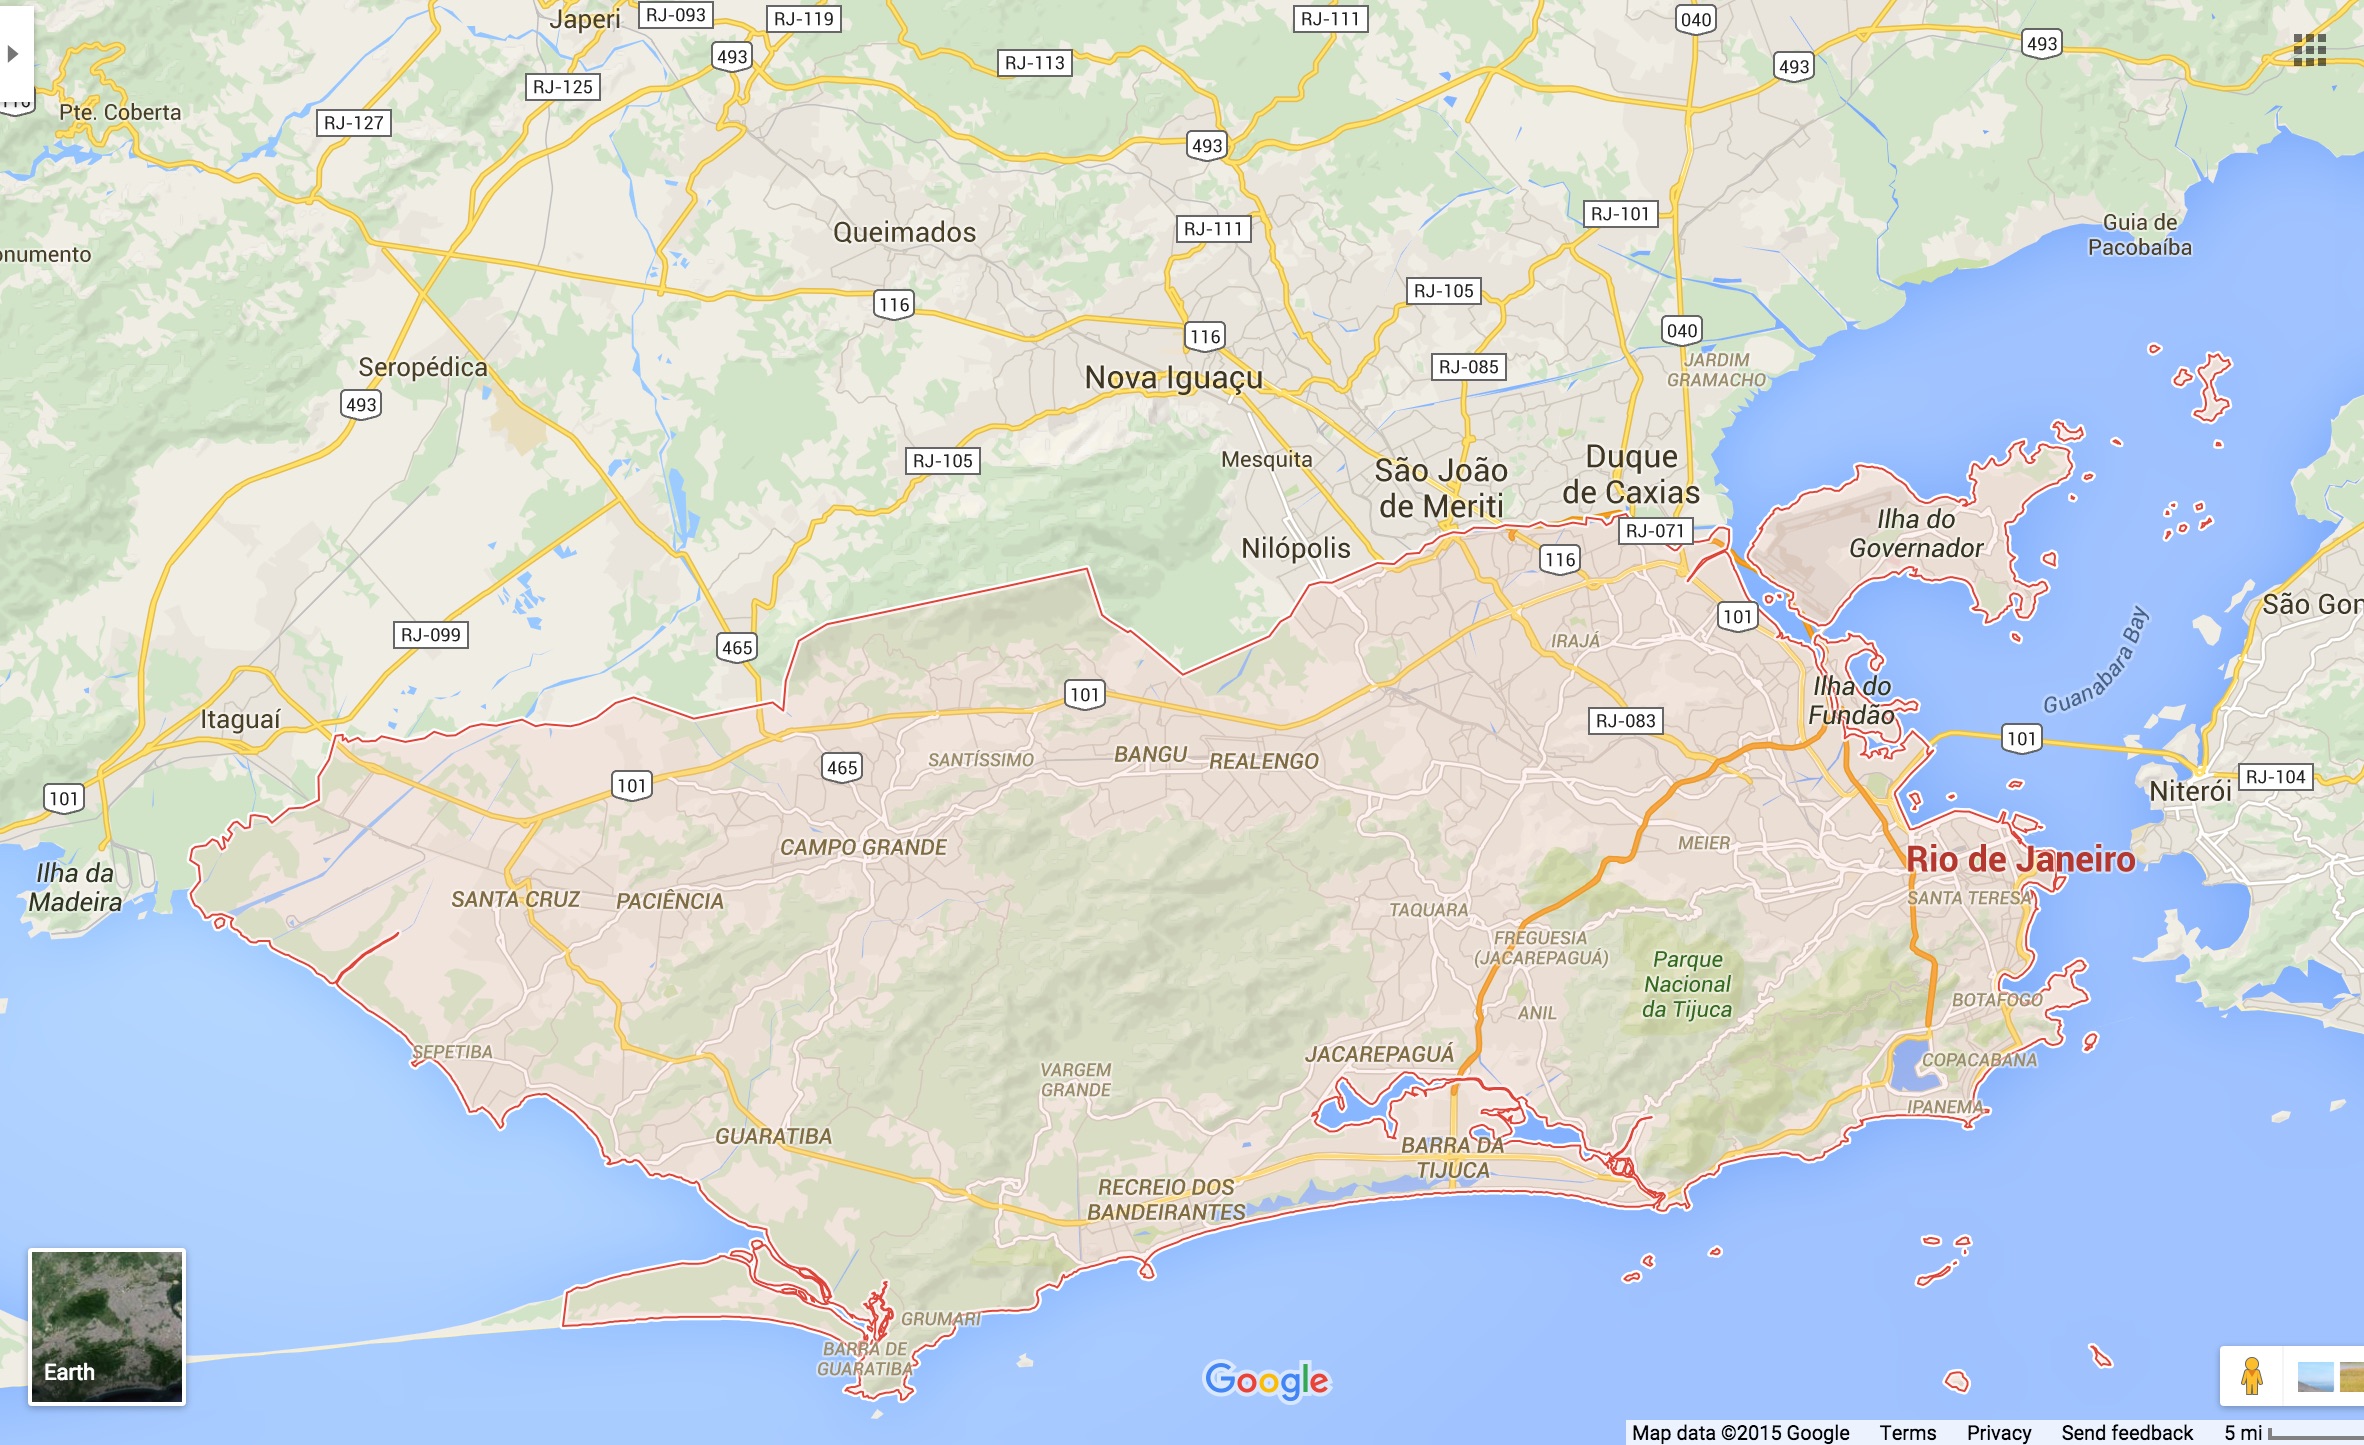 Guanabara Bay to the right in relation to the municipality of Rio de Janeiro (outlined in red)